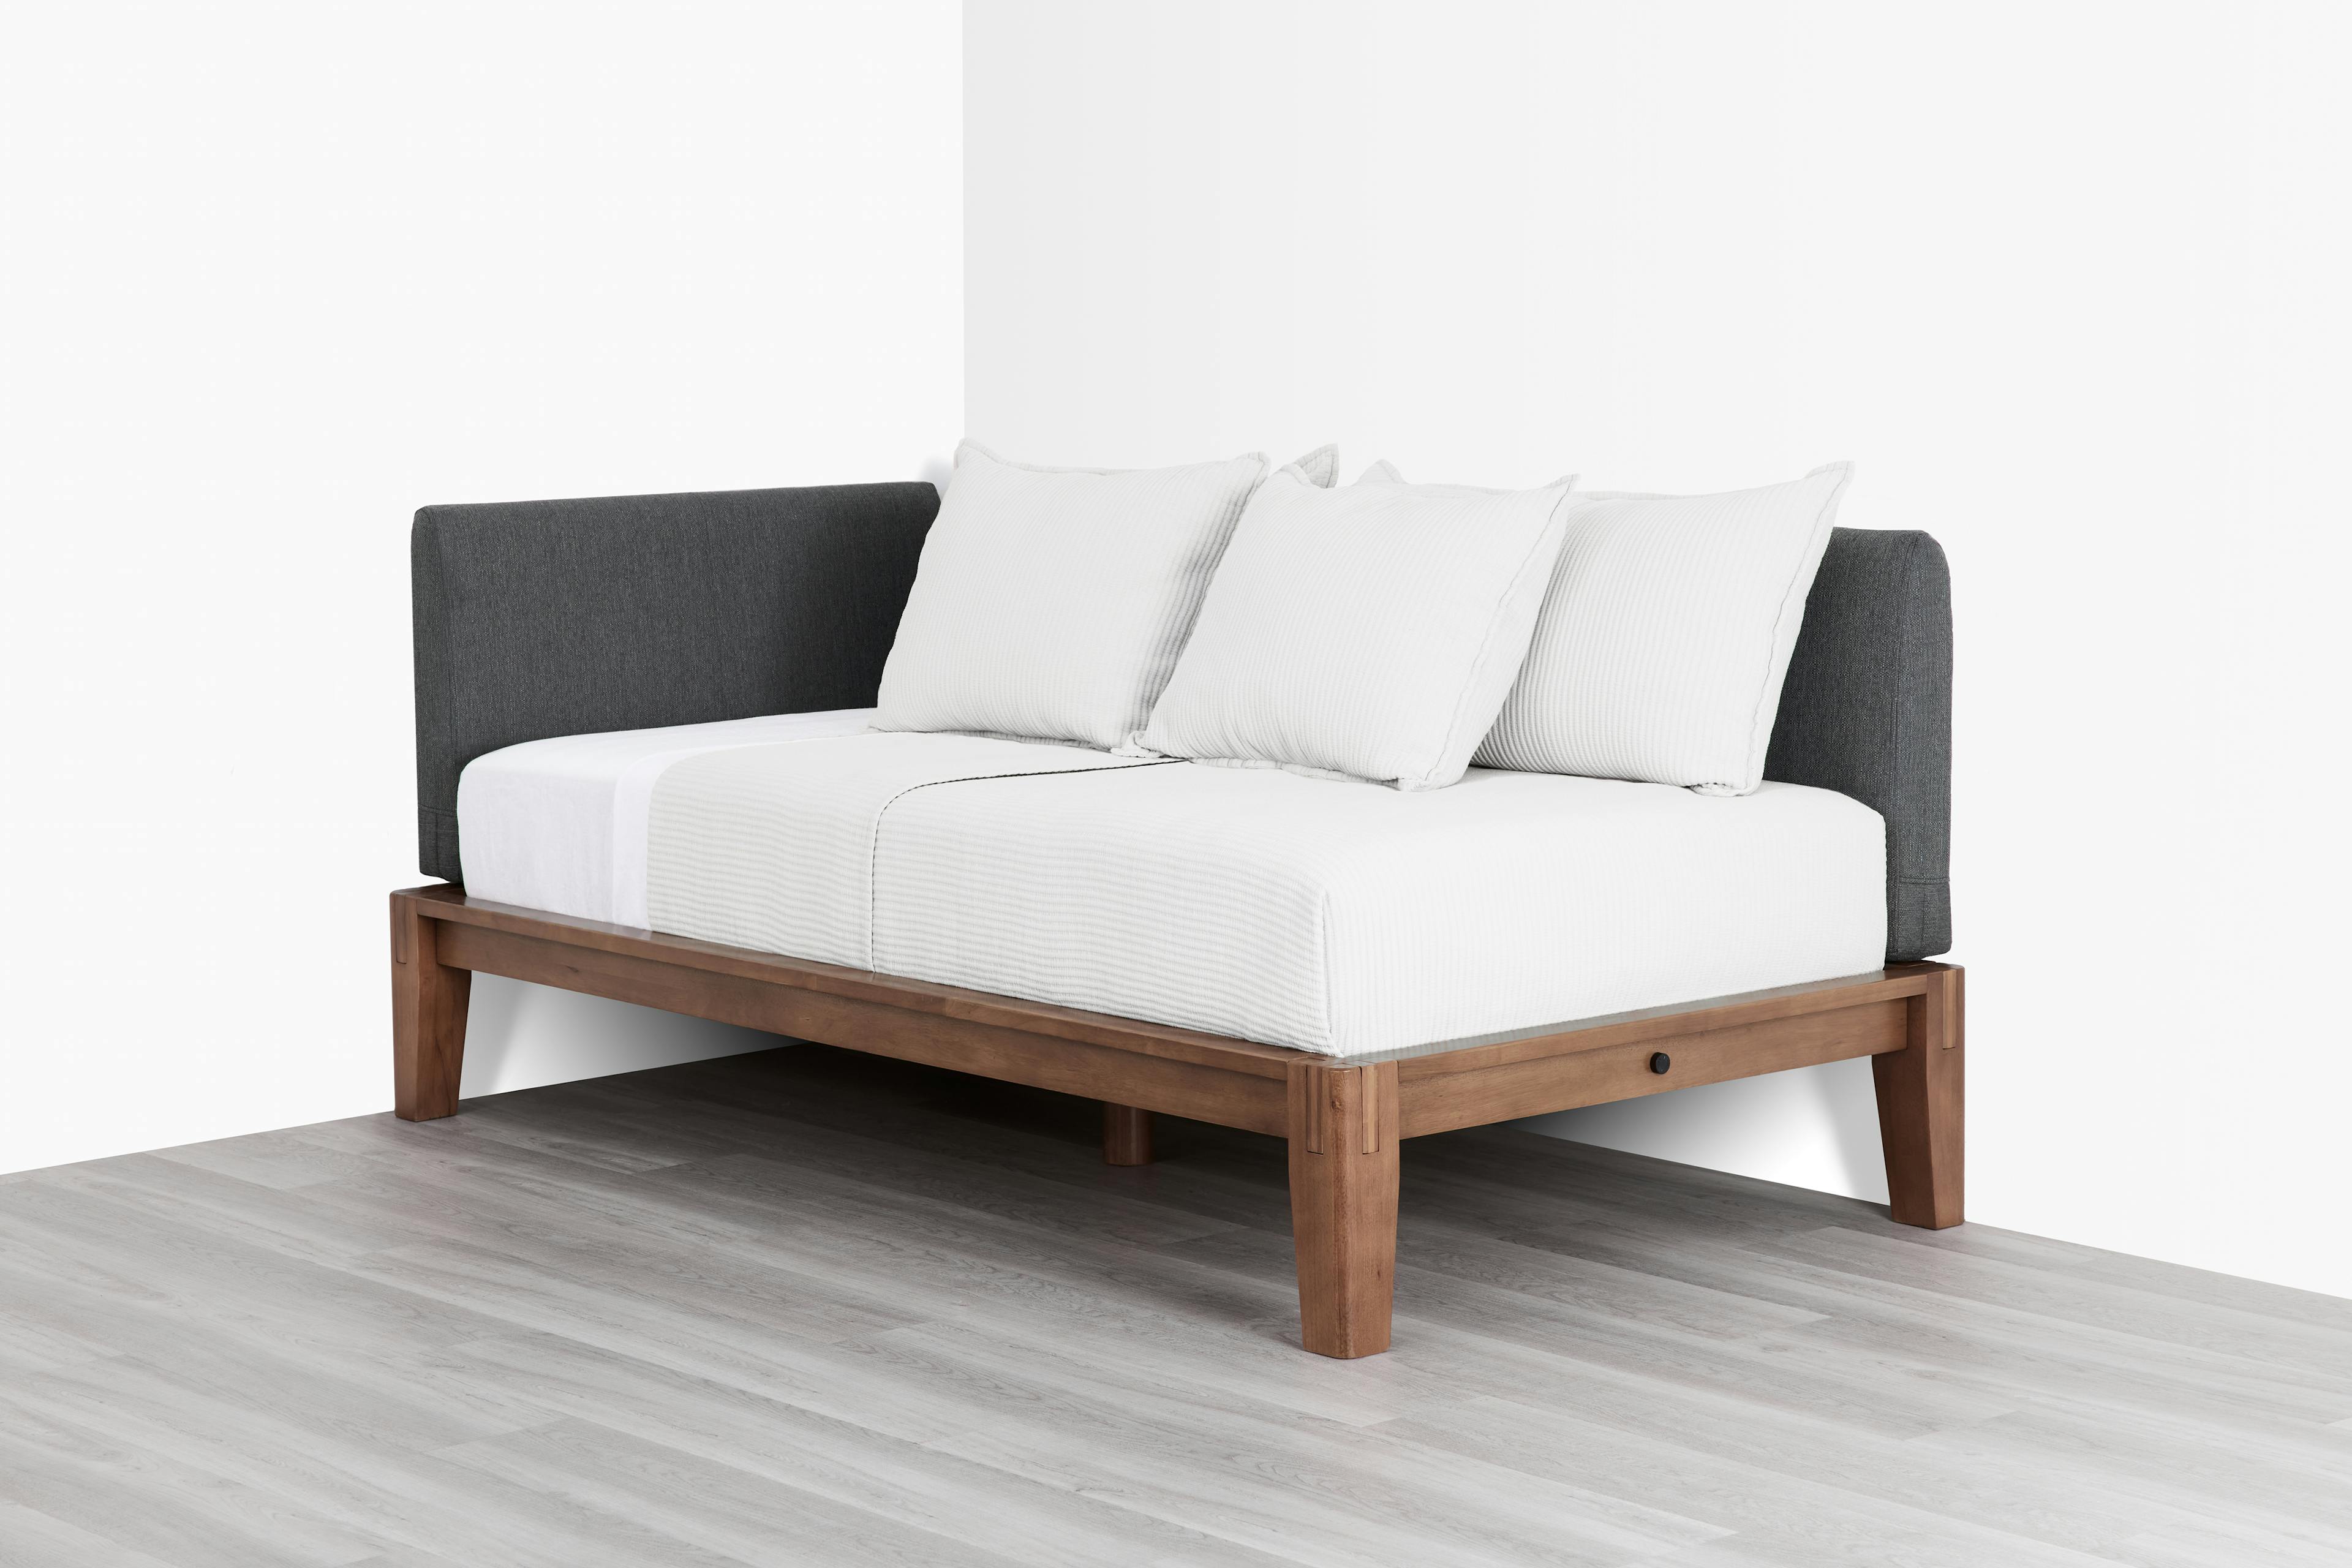 The Daybed in Walnut and Dark Charcoal Color with Pillows